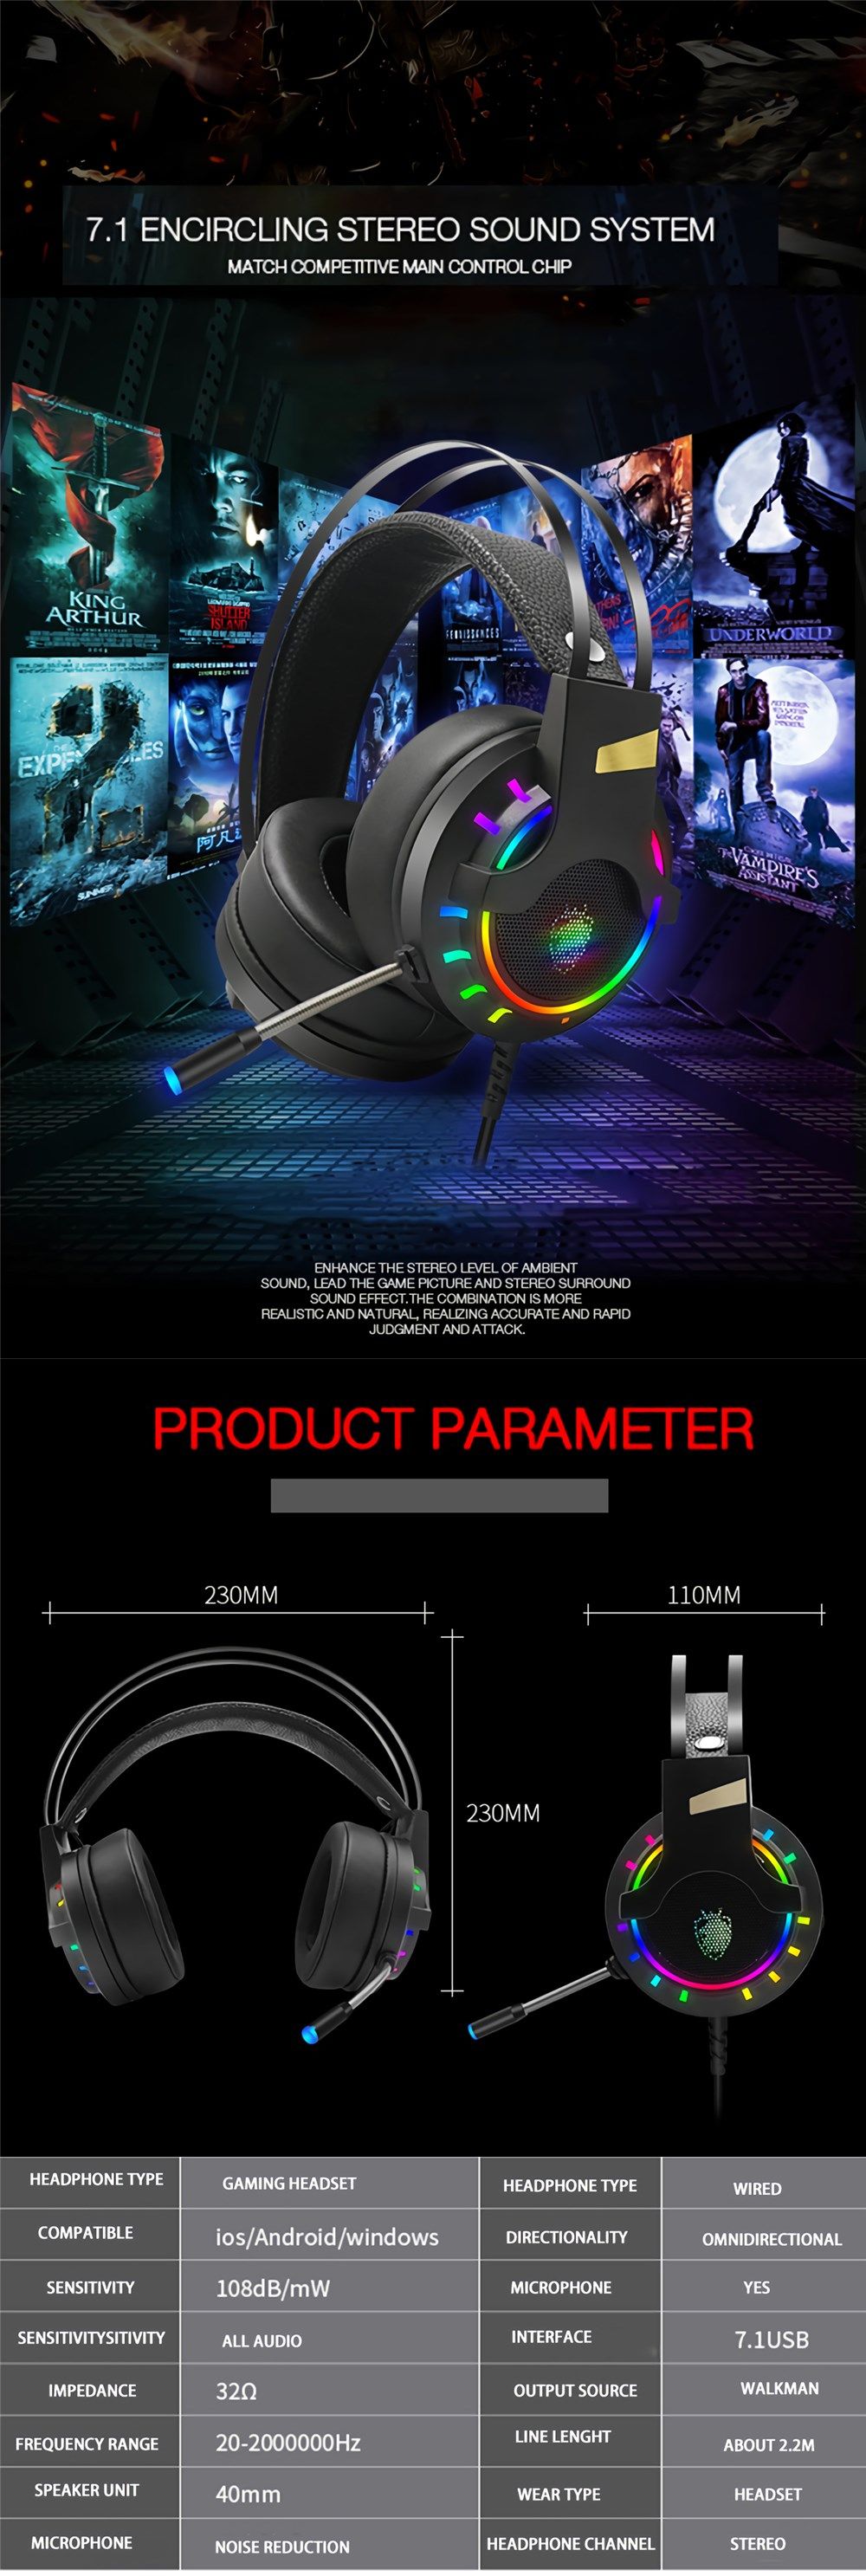 Tuner-K3-Game-Headphone-71-Channel-35mm-USB-Wired-Bass-RGB-Gaming-Headset-Stereo-Sound-Headset-with--1686843